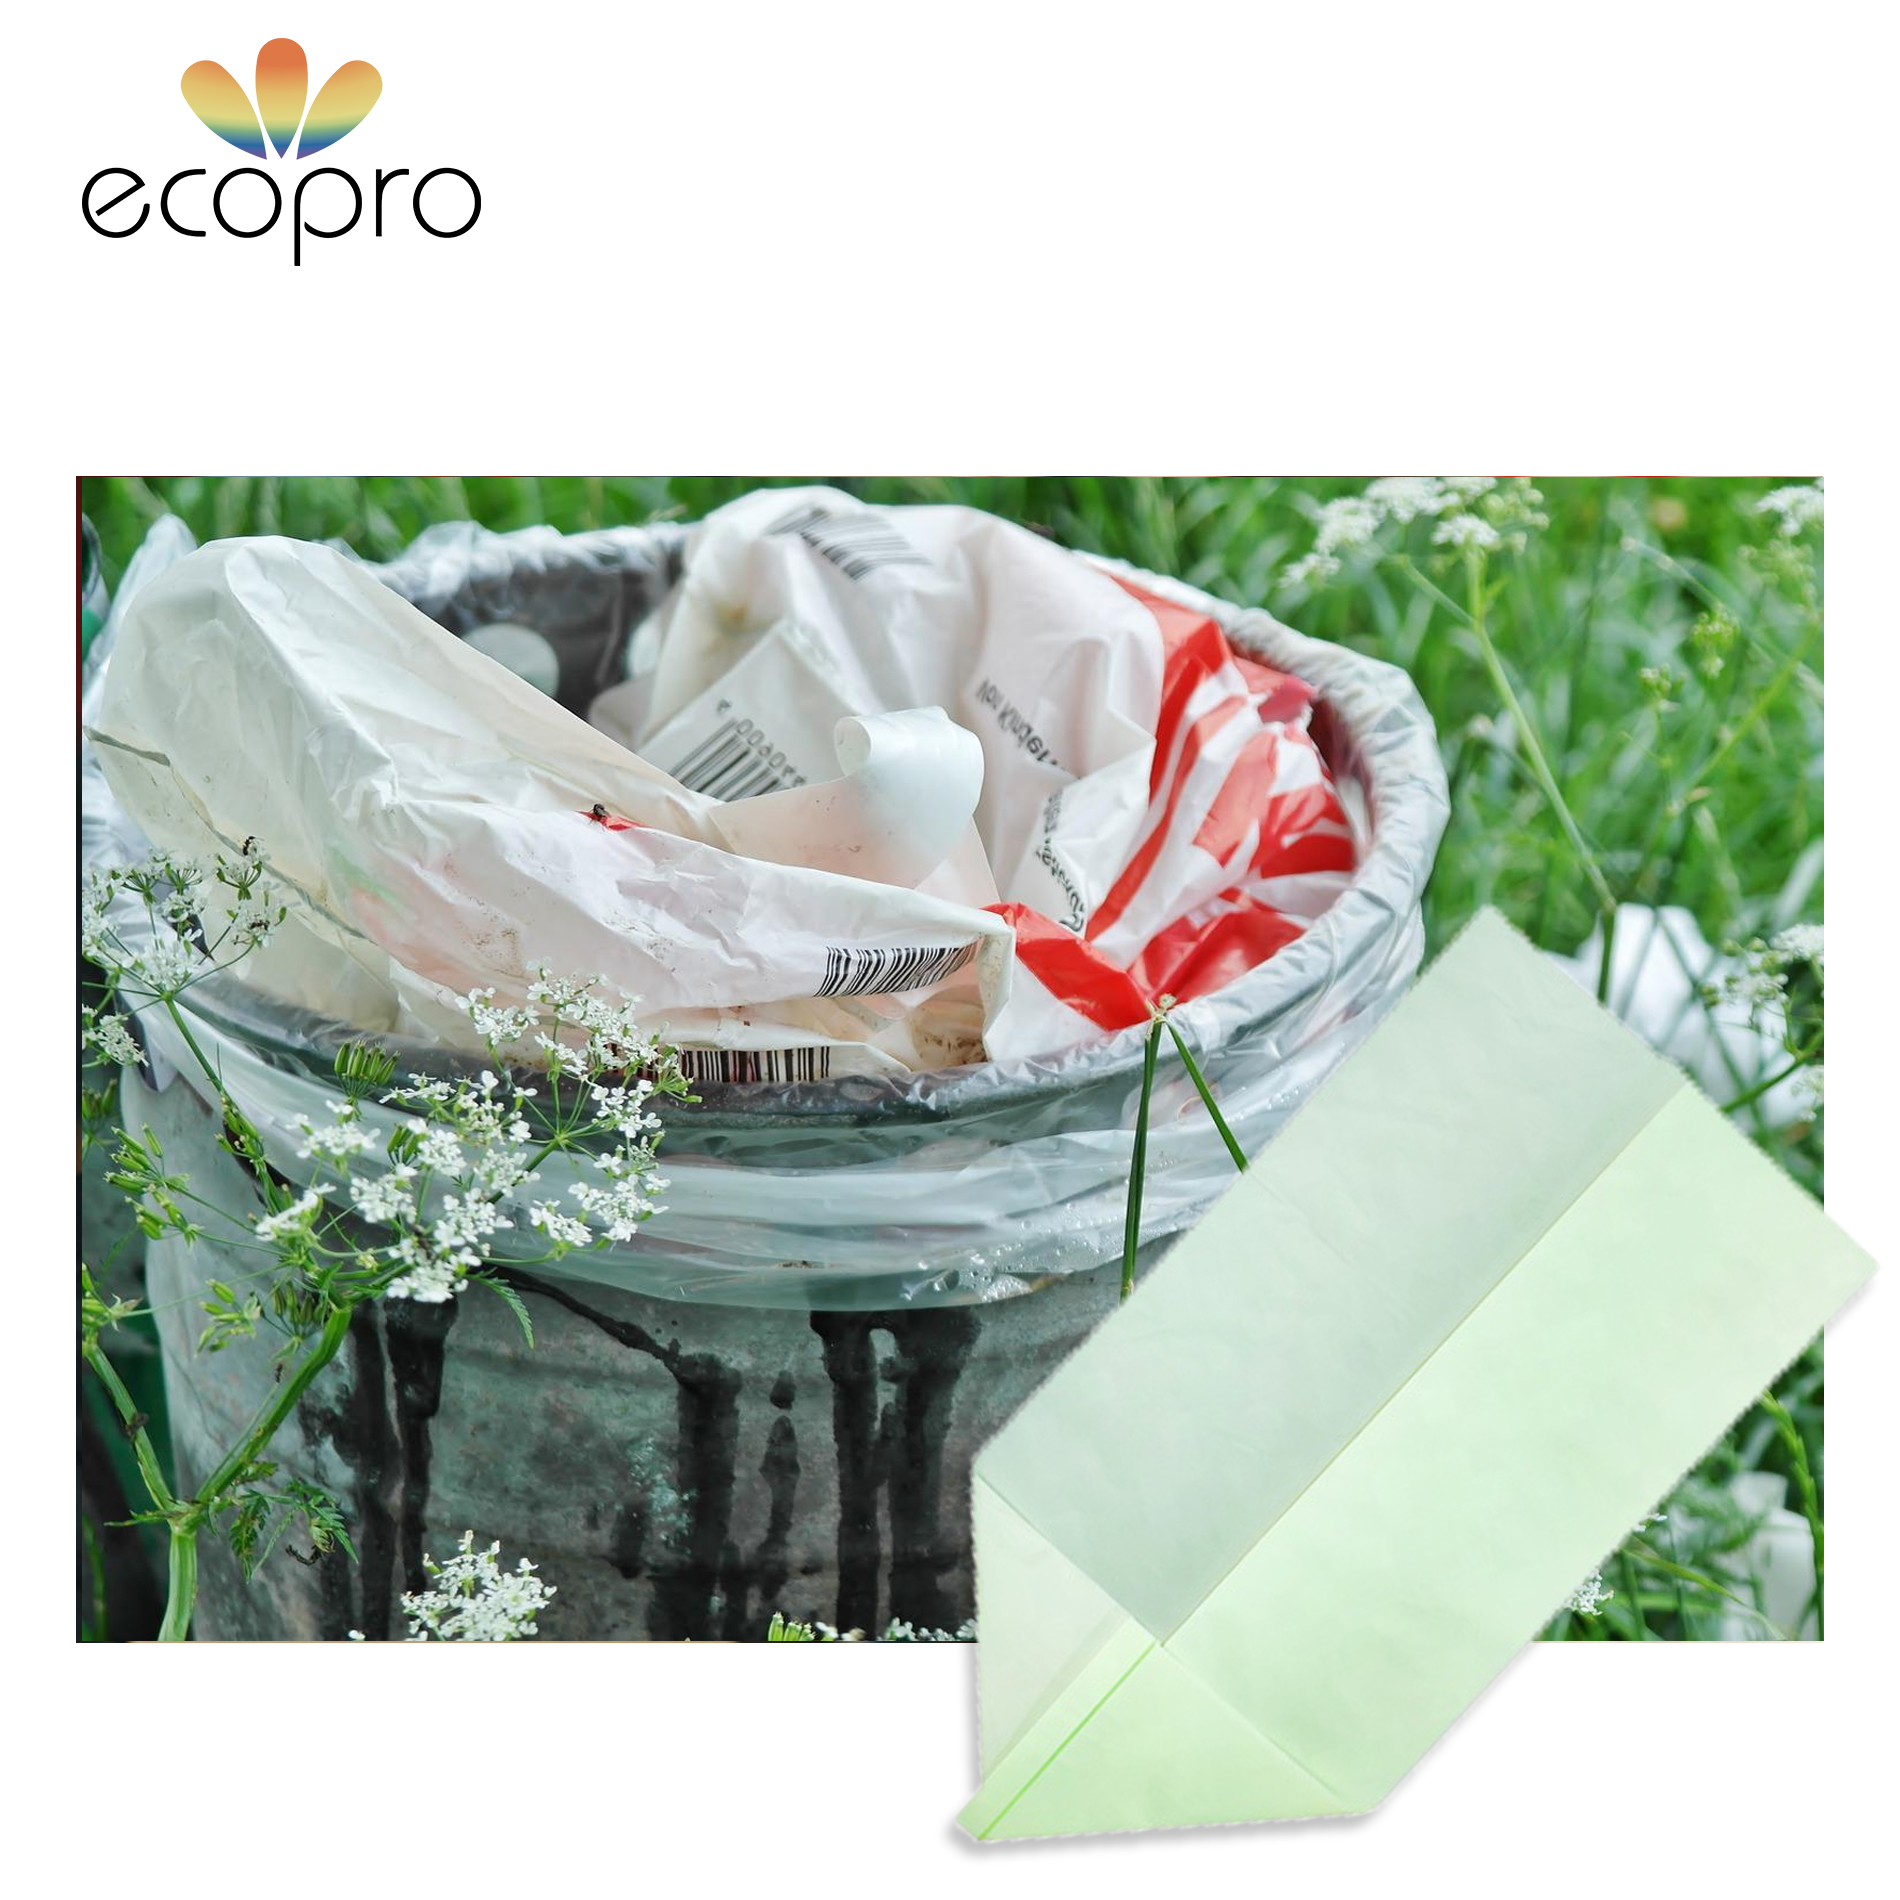 Compostable Trash Bin Bag Recommend For Household Cleaning